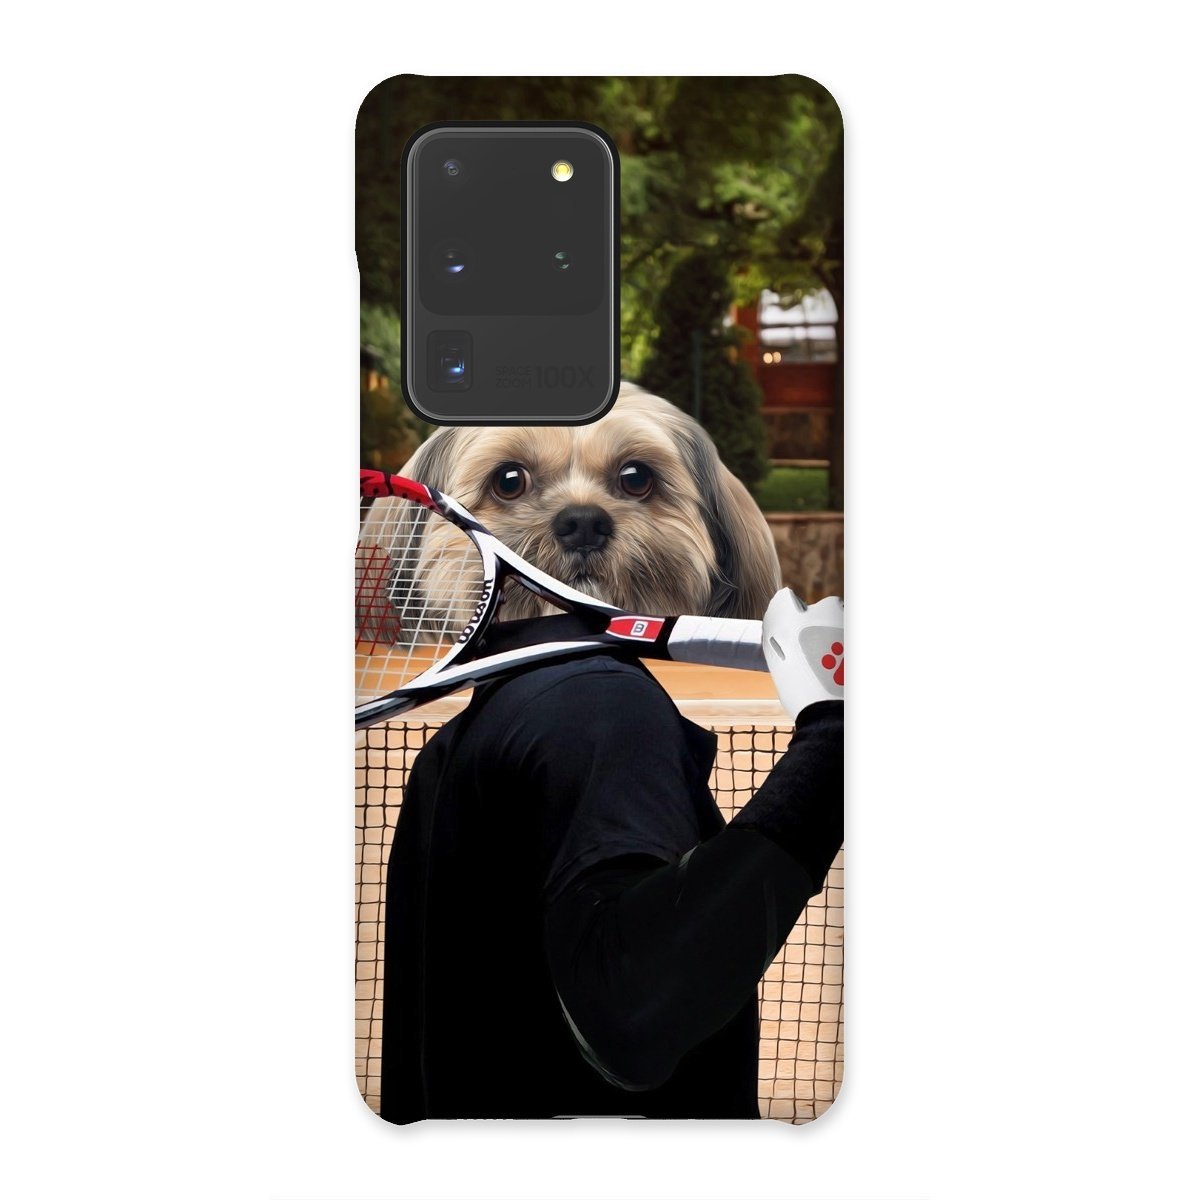 The Tennis Champion: Custom Pet Phone Case - Paw & Glory - paw and glory, personalized dog phone case, pet phone case, personalised dog phone case uk, personalised cat phone case, dog phone case custom, personalised iphone 11 case dogs, Pet Portraits phone case,